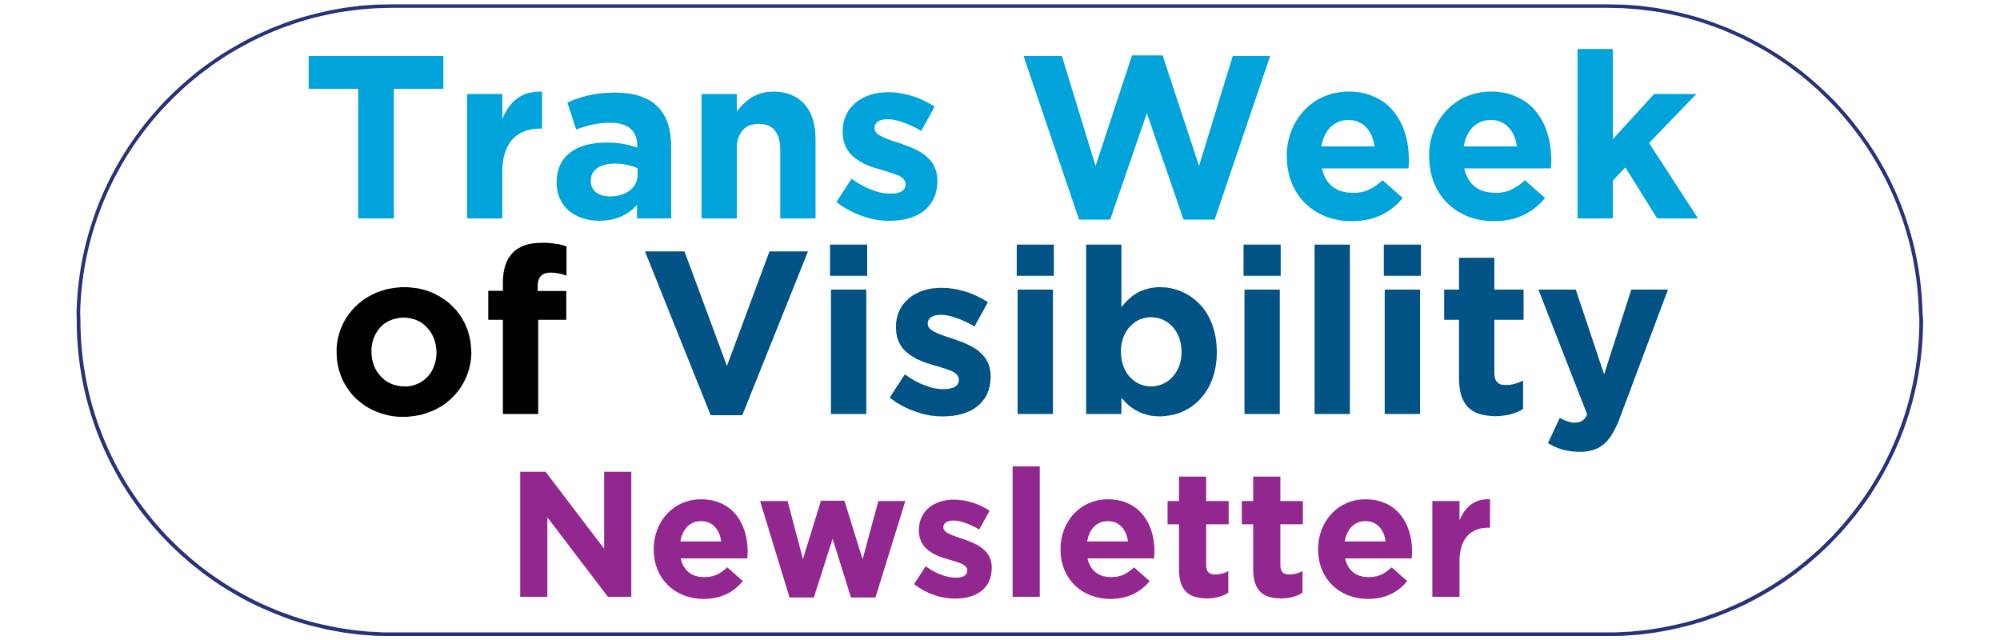 "Trans Week of Visibility Newsletter"